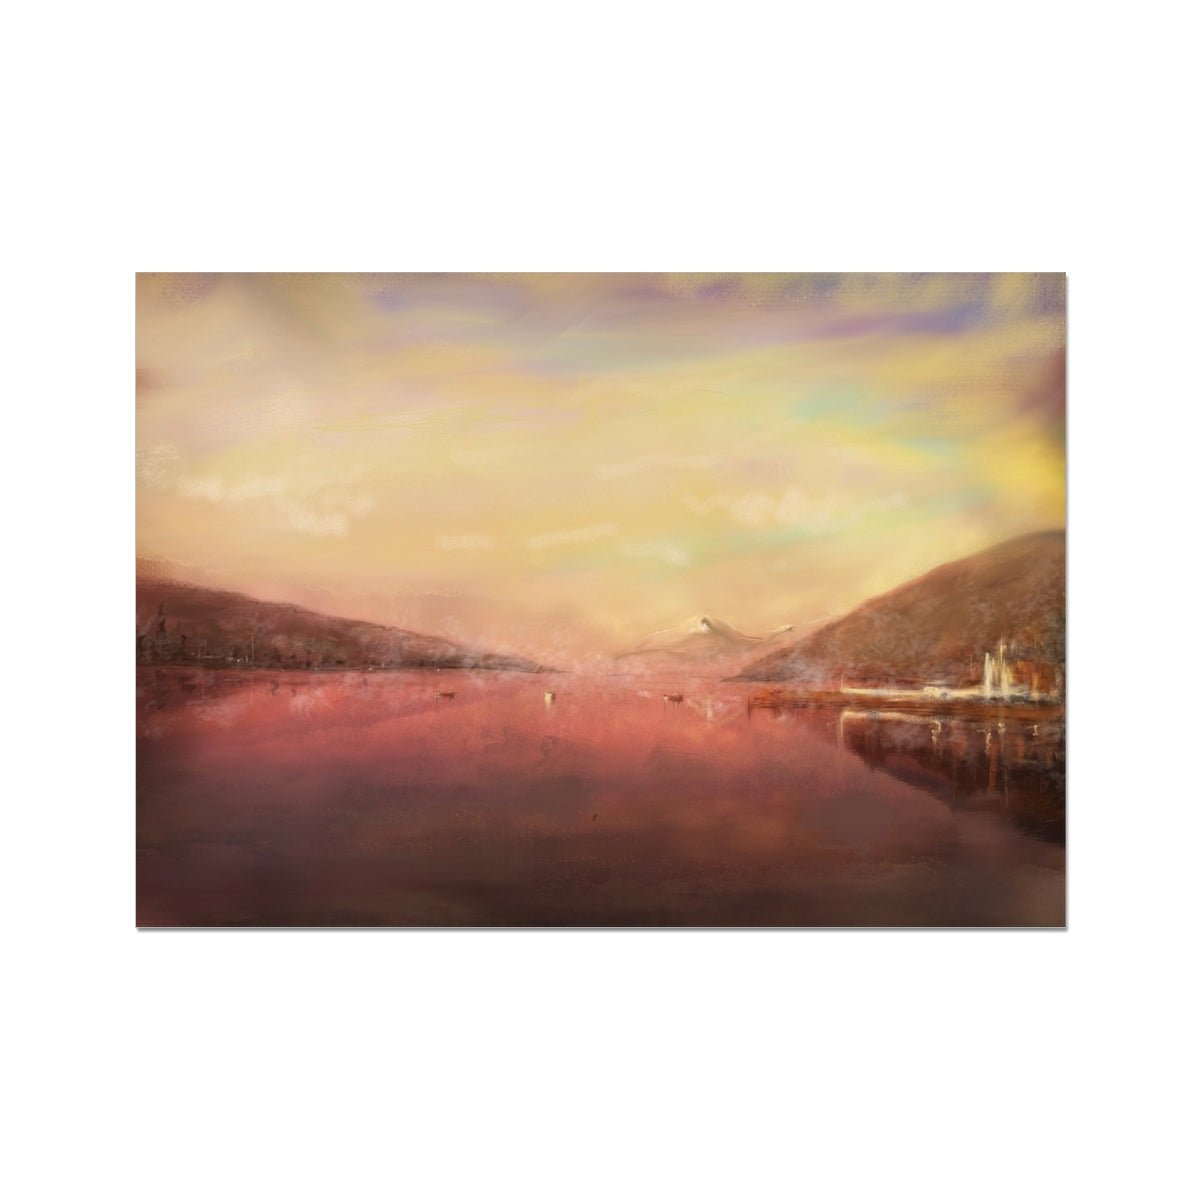 Loch Tay Painting | Fine Art Prints From Scotland-Unframed Prints-Scottish Lochs & Mountains Art Gallery-A2 Landscape-Paintings, Prints, Homeware, Art Gifts From Scotland By Scottish Artist Kevin Hunter